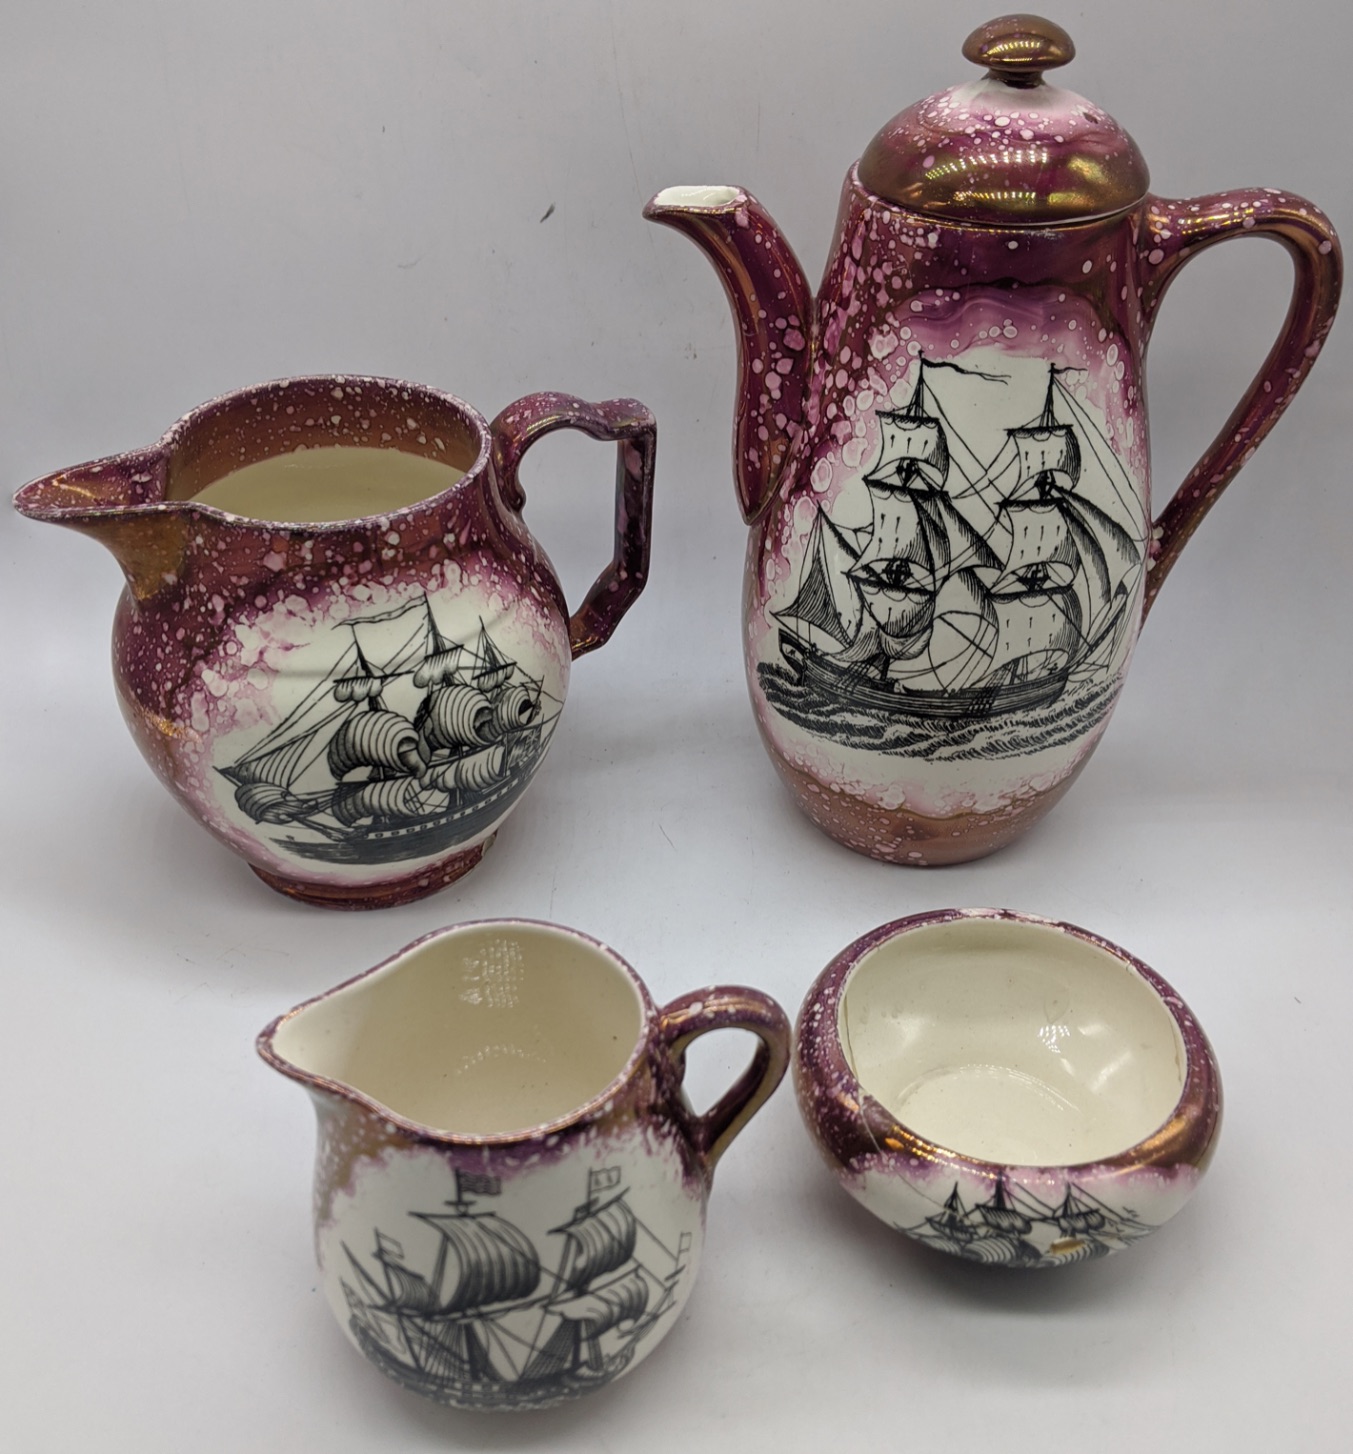 A collection of Gray s Pottery, pattern A7967 splashed lustre, mid-20th century, to include a tea